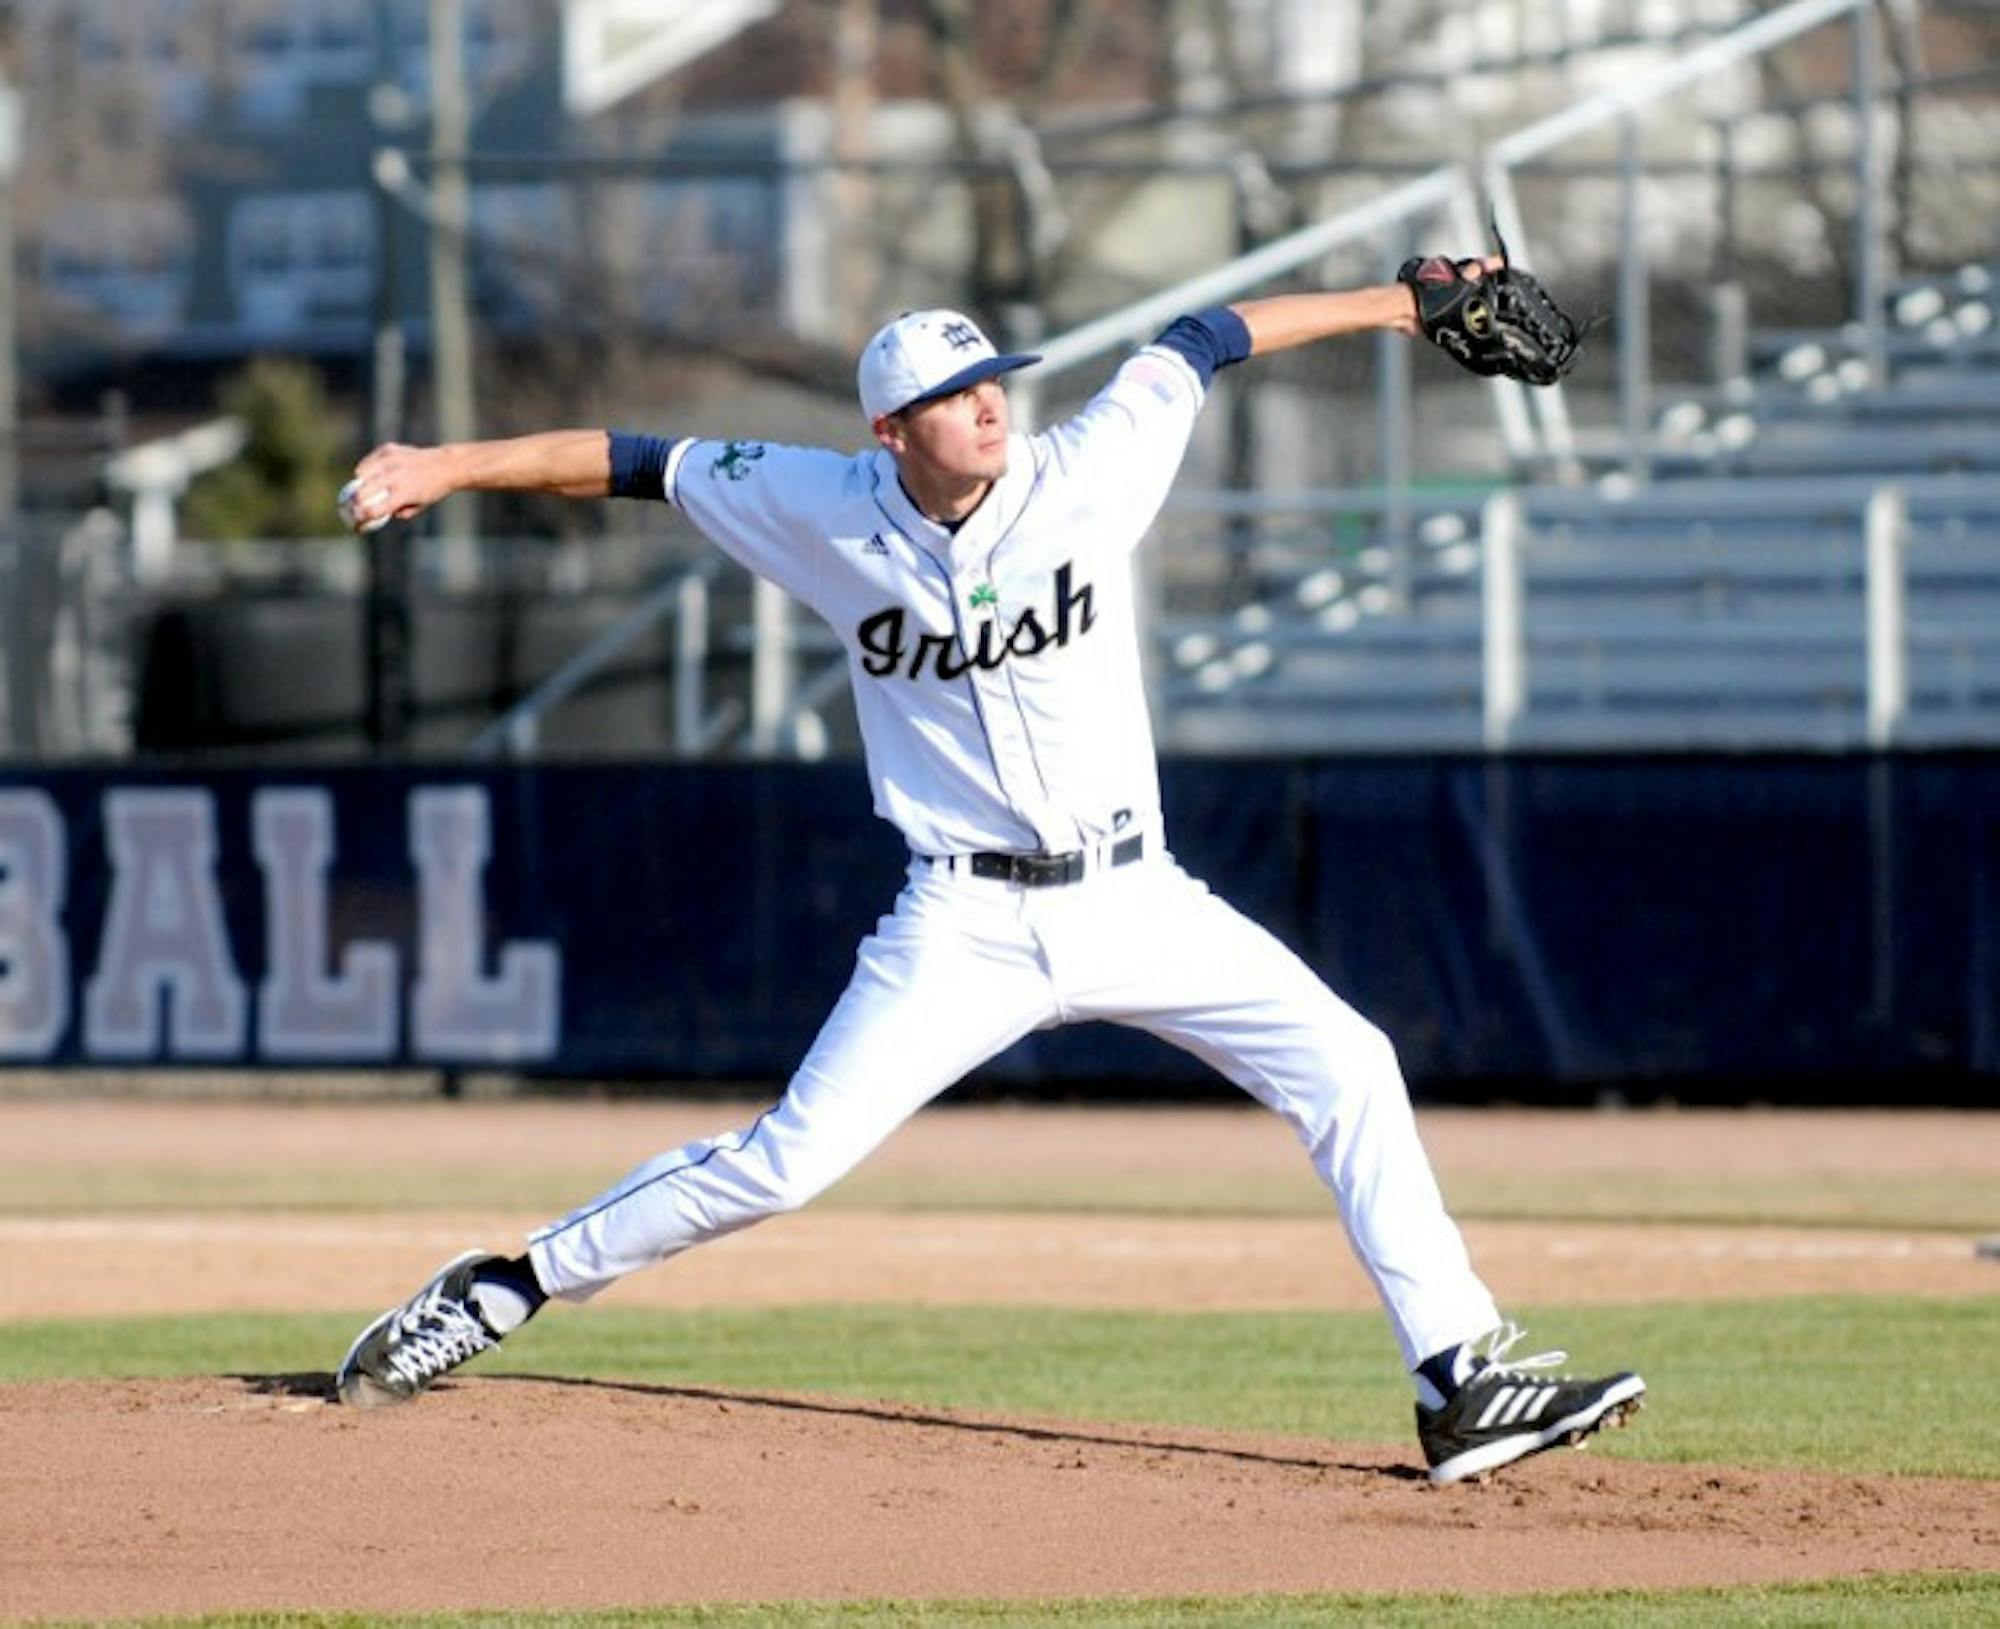 Irish junior pitcher Matt Ternowchek throws a pitch during Notre Dame’s 6-2 victory over UIC on April 2, 2013.